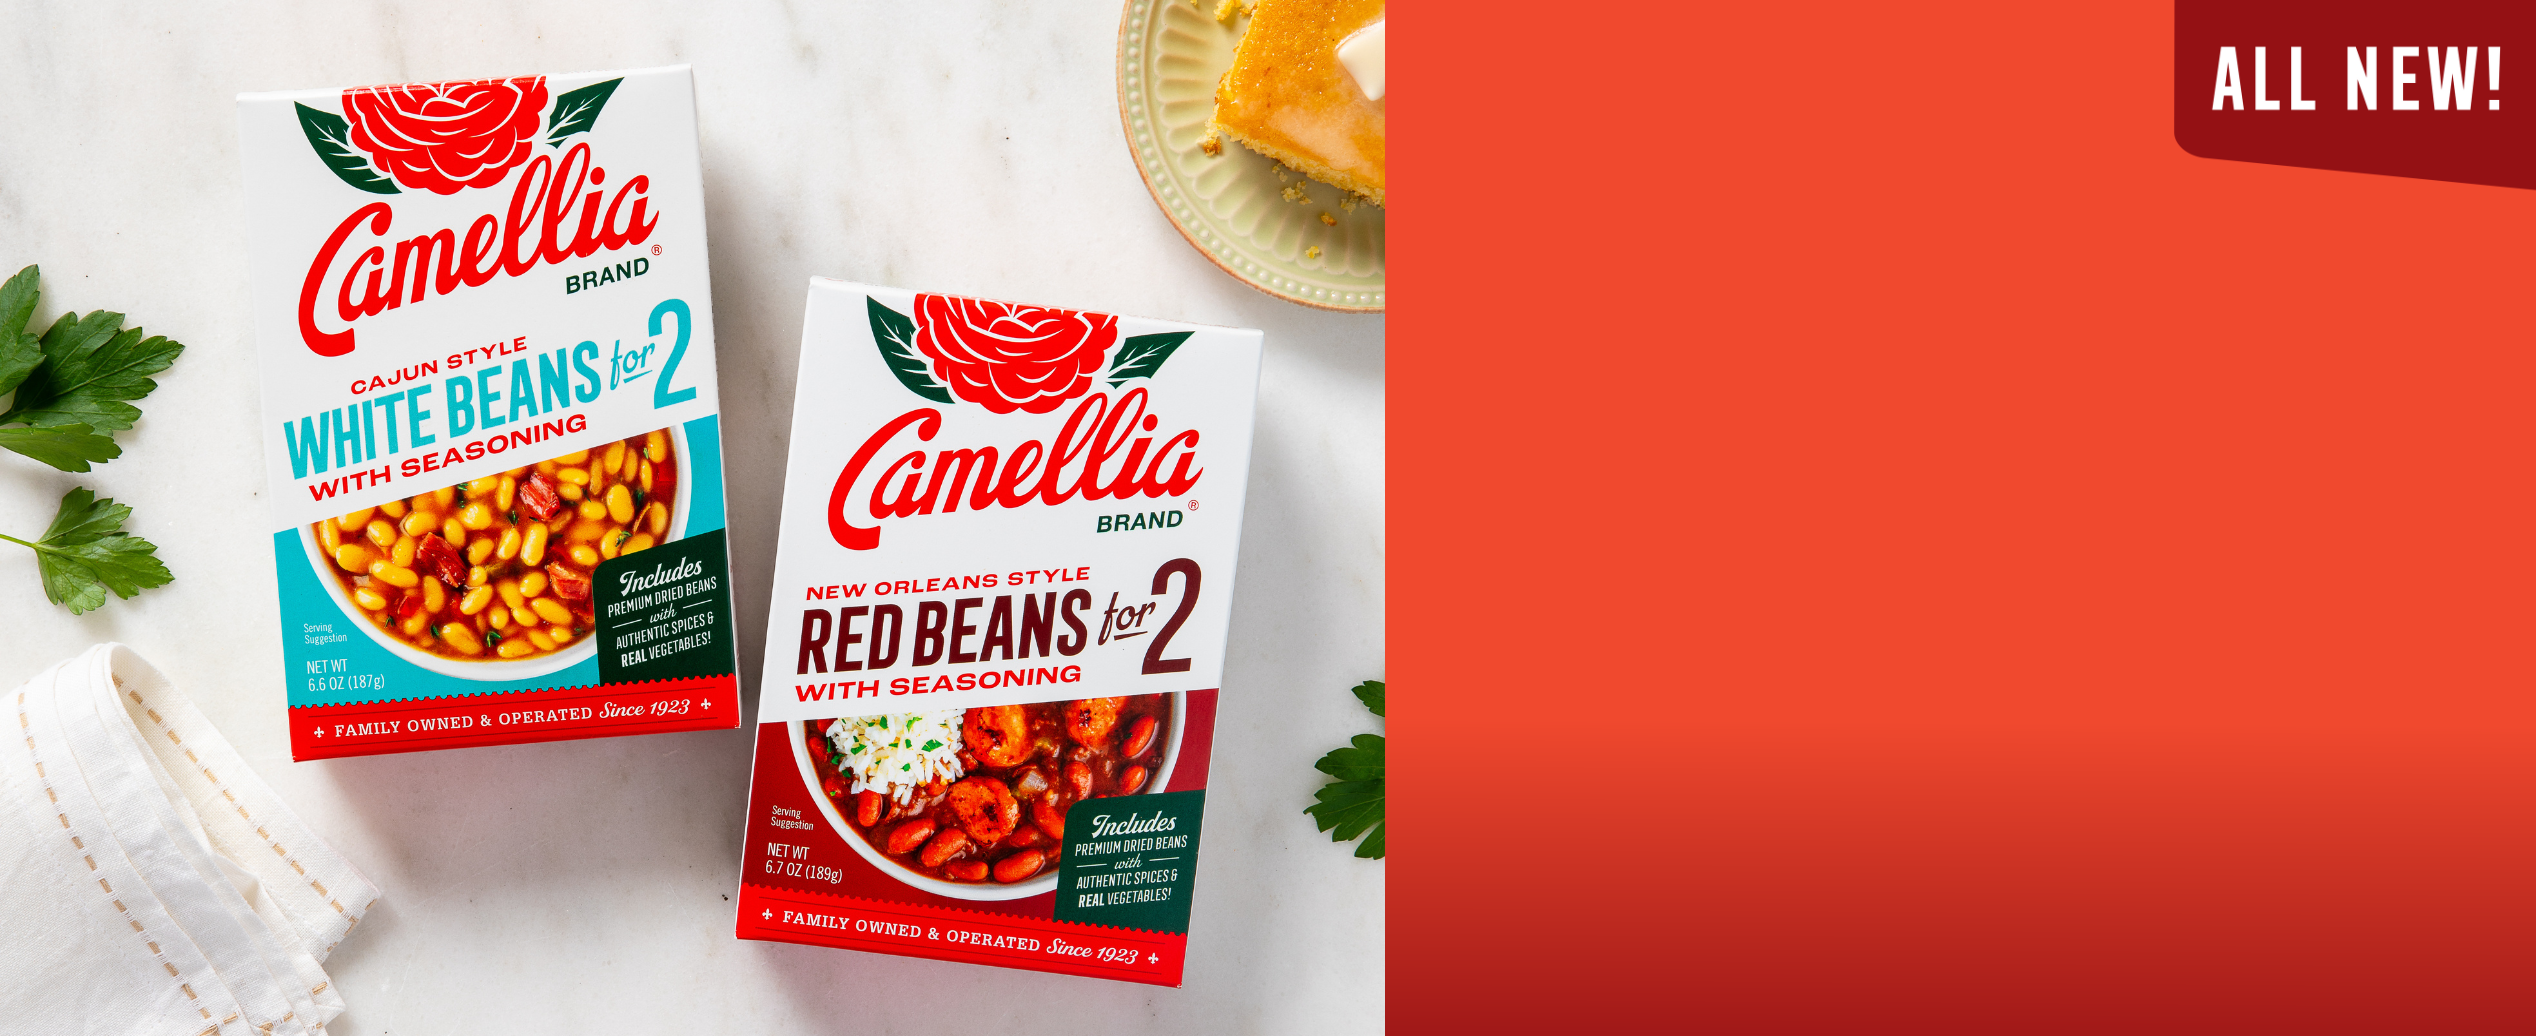 It's 2 Simple - Beans for 2 with Seasoning - Camellia Brand